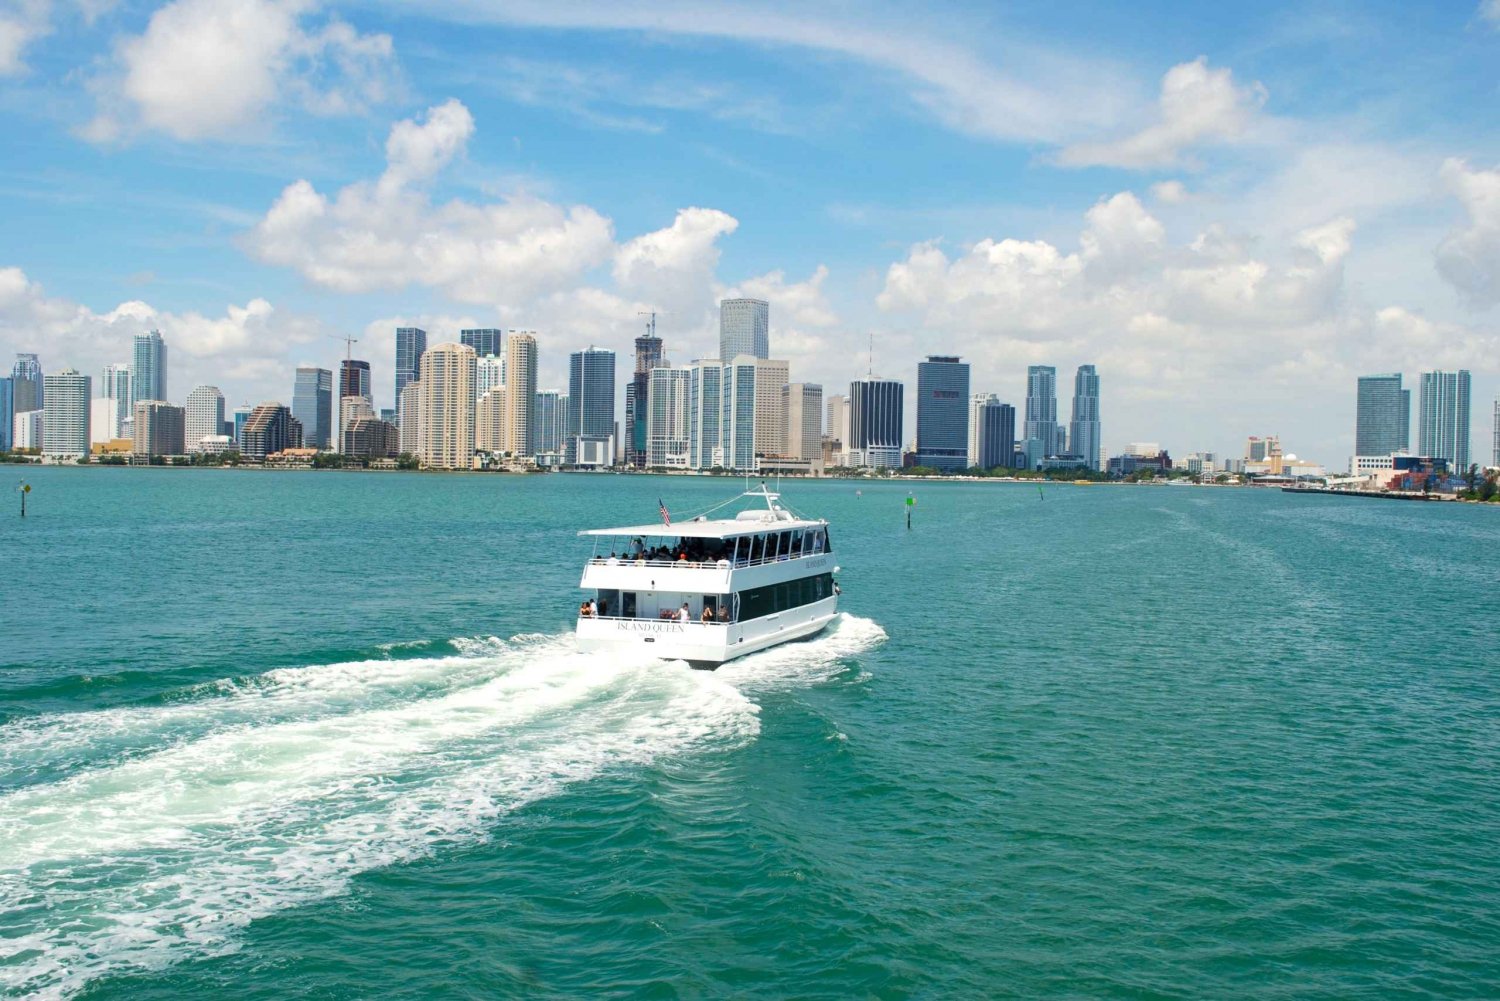 Miami: City Tour with Boat and Language Options